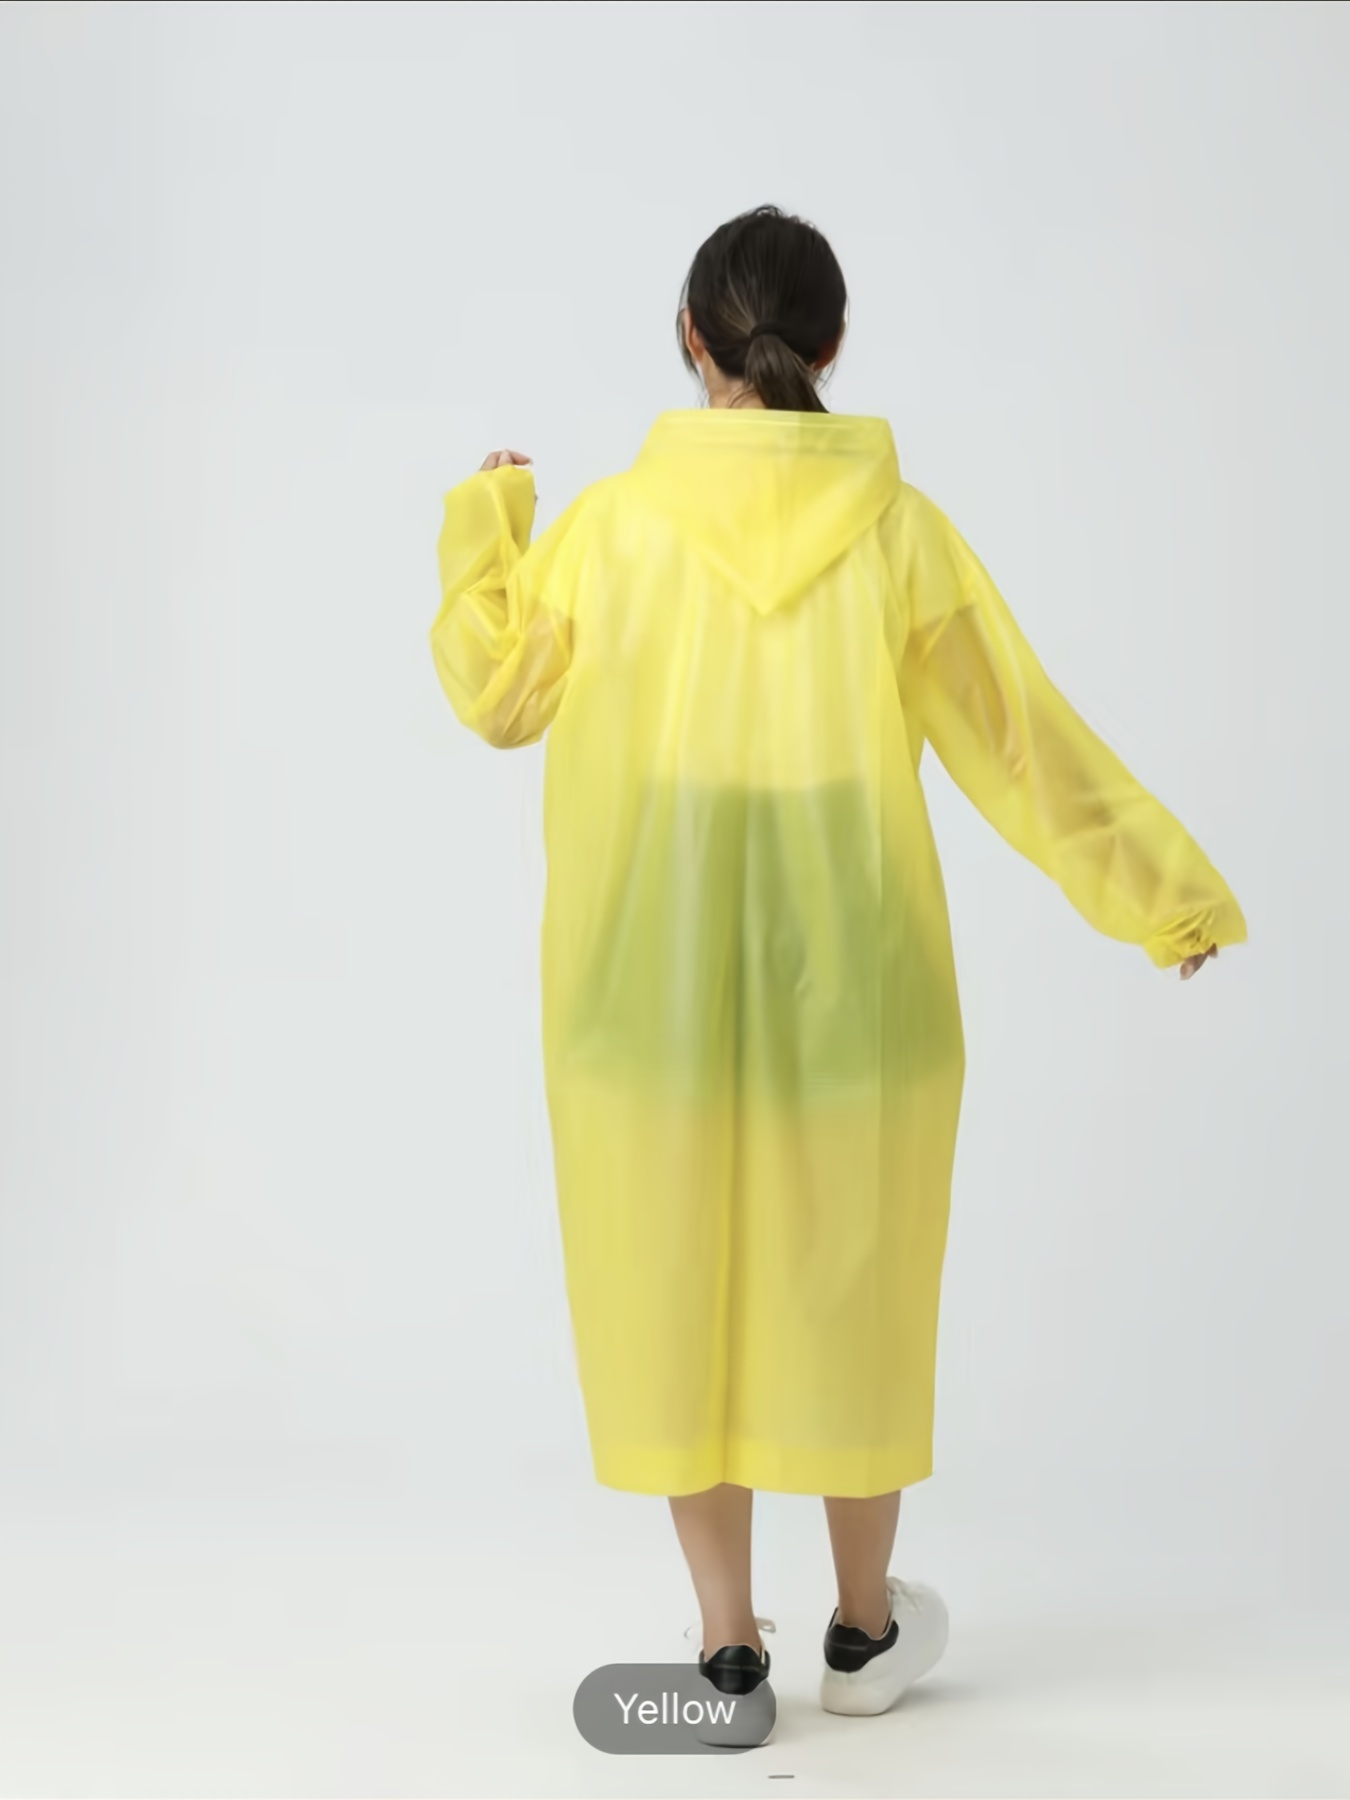 Chubasquero impermeable para hombre y mujer, poncho impermeable con rayas  reflectantes yeacher Guardapolvo